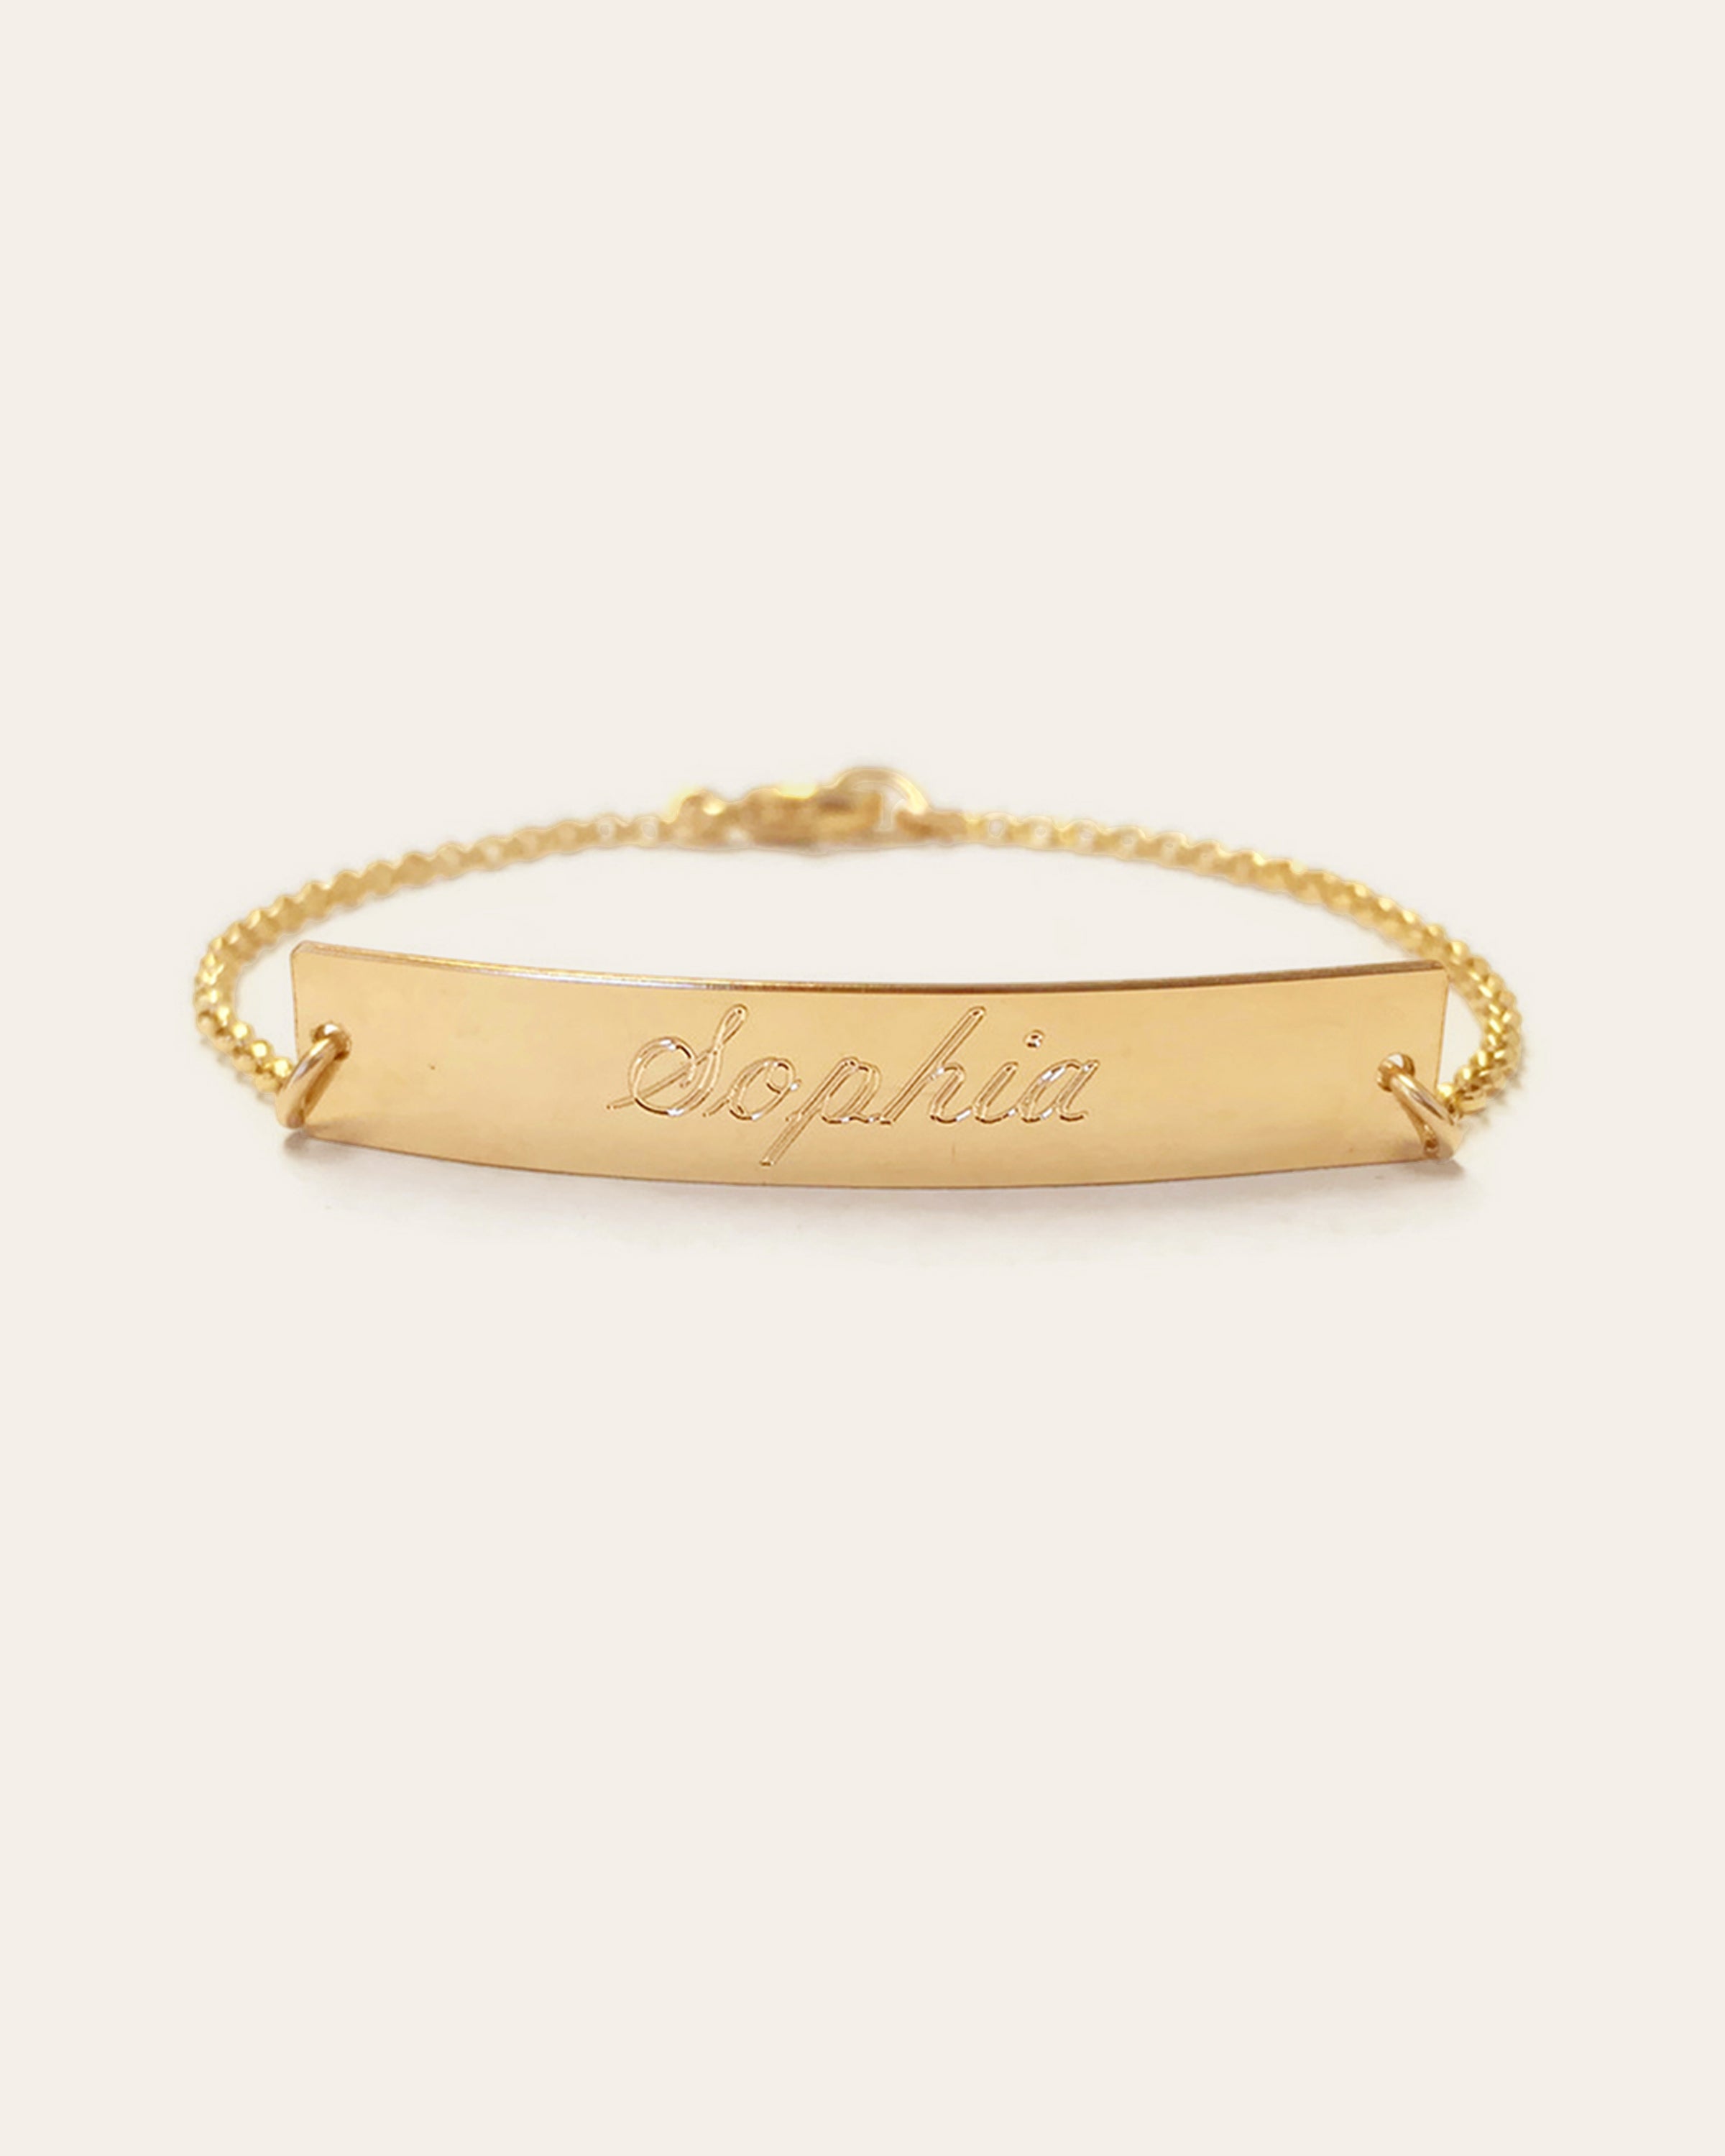 Name Bracelet in Gold Plated